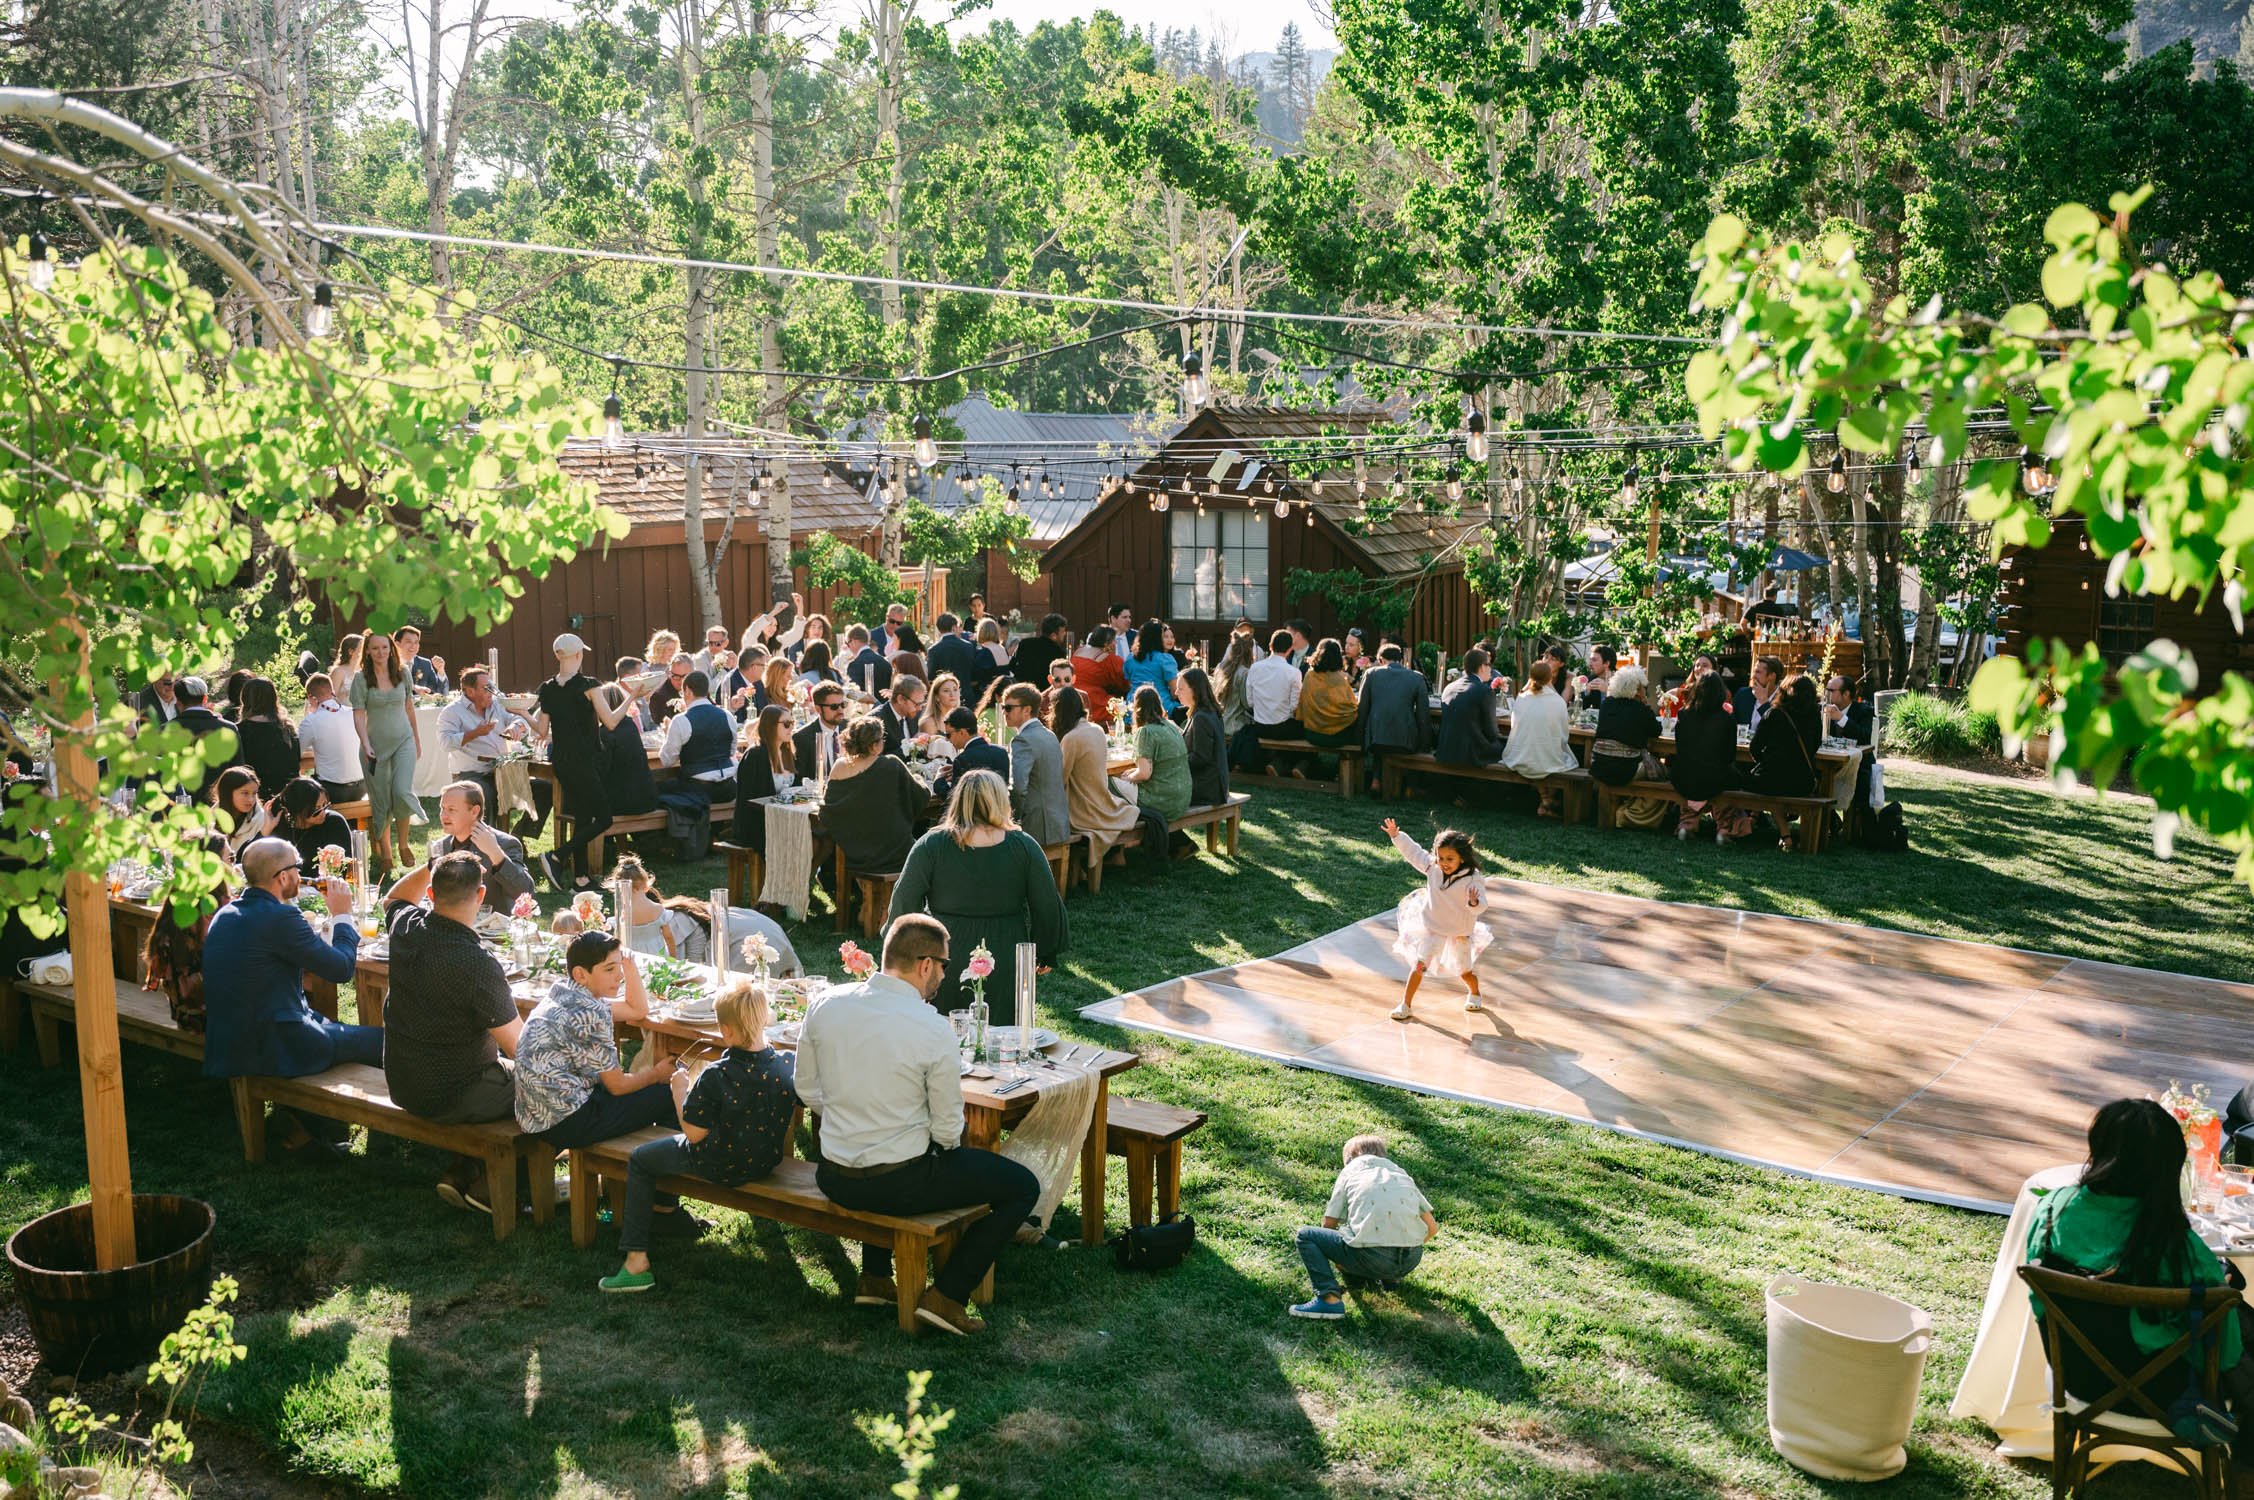 Desolation wilderness hotel wedding, photo of an outdoor reception in the forest